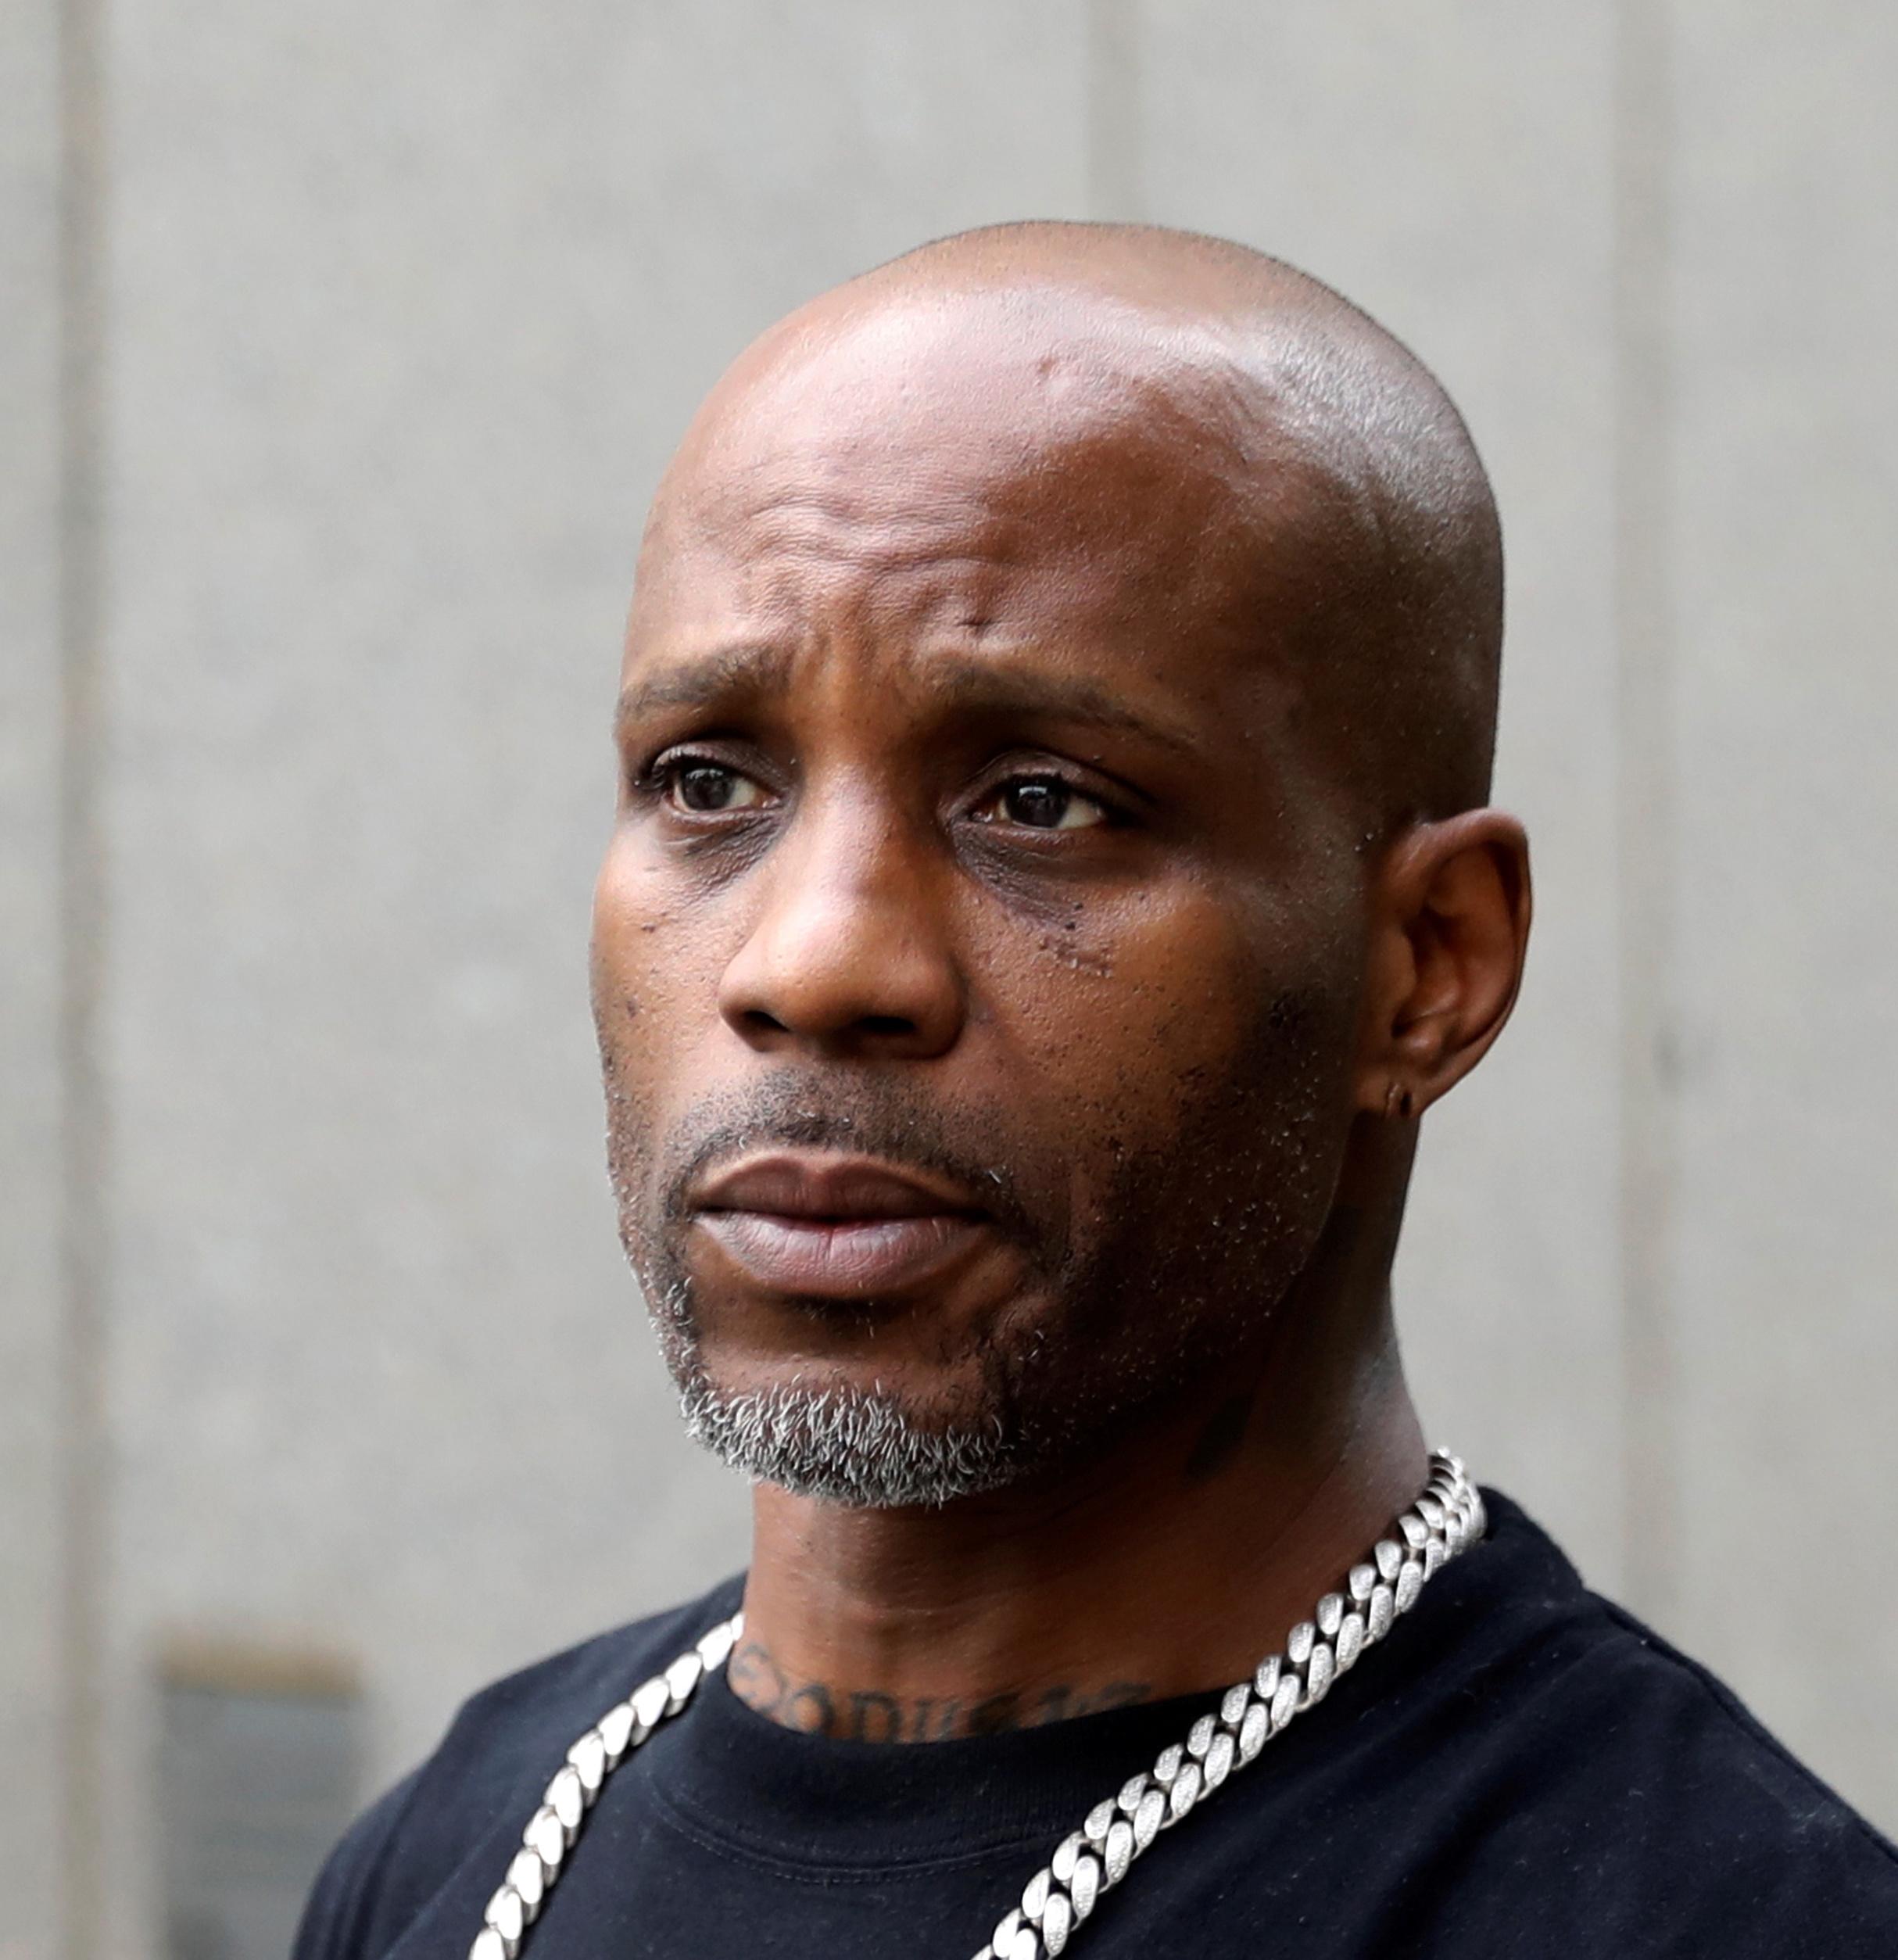 DMX's Top Film Roles, from 'Belly' to 'Romeo Must Die